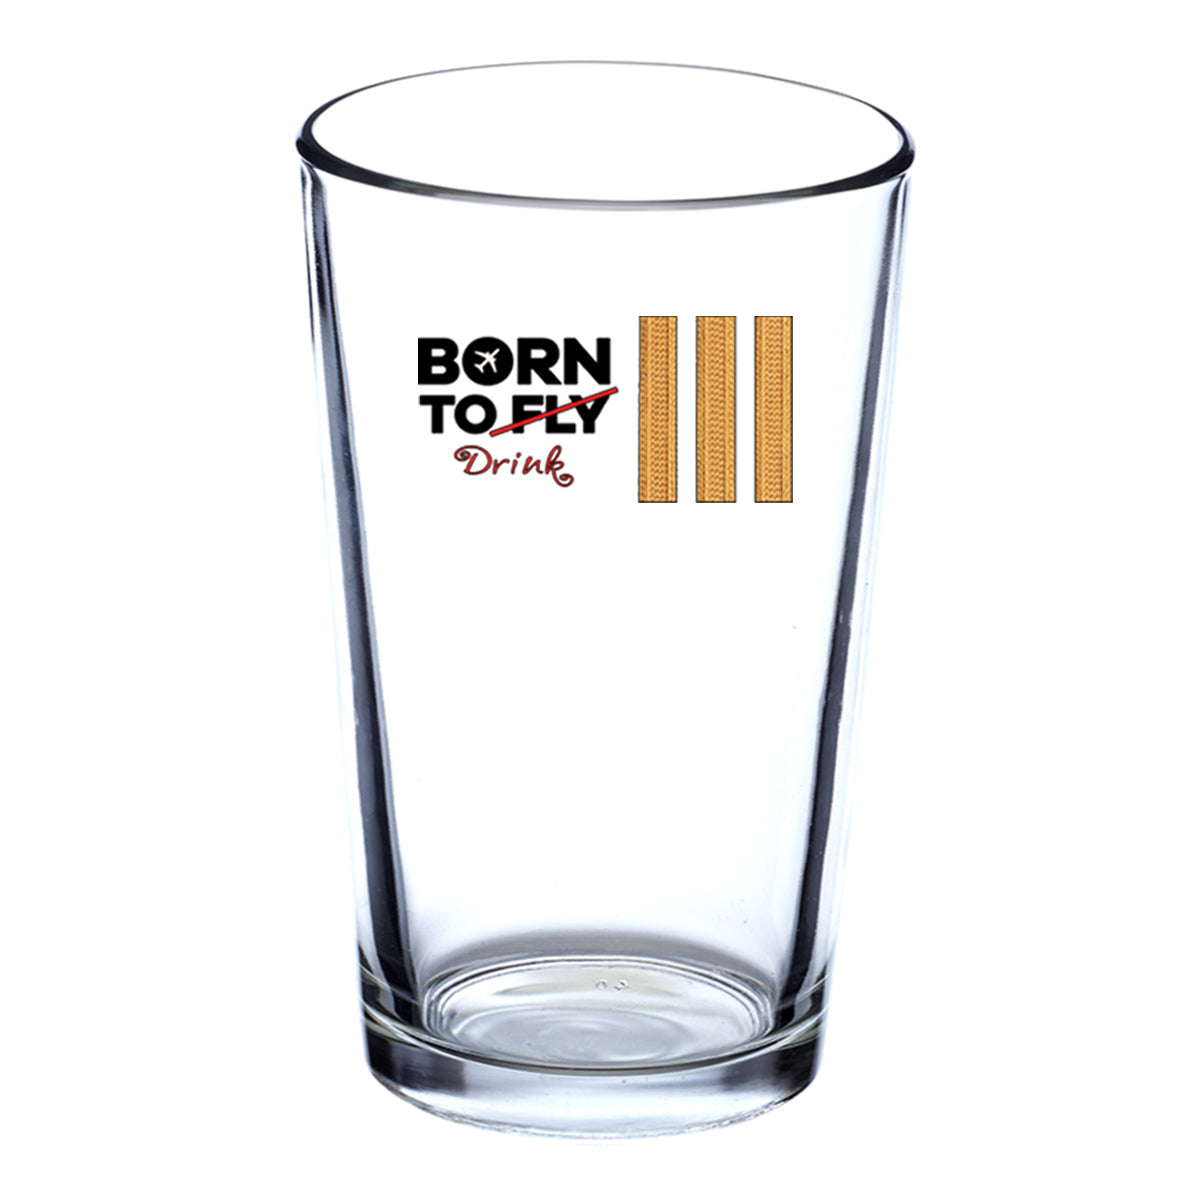 Born To Drink & 3 Lines Designed Beer & Water Glasses